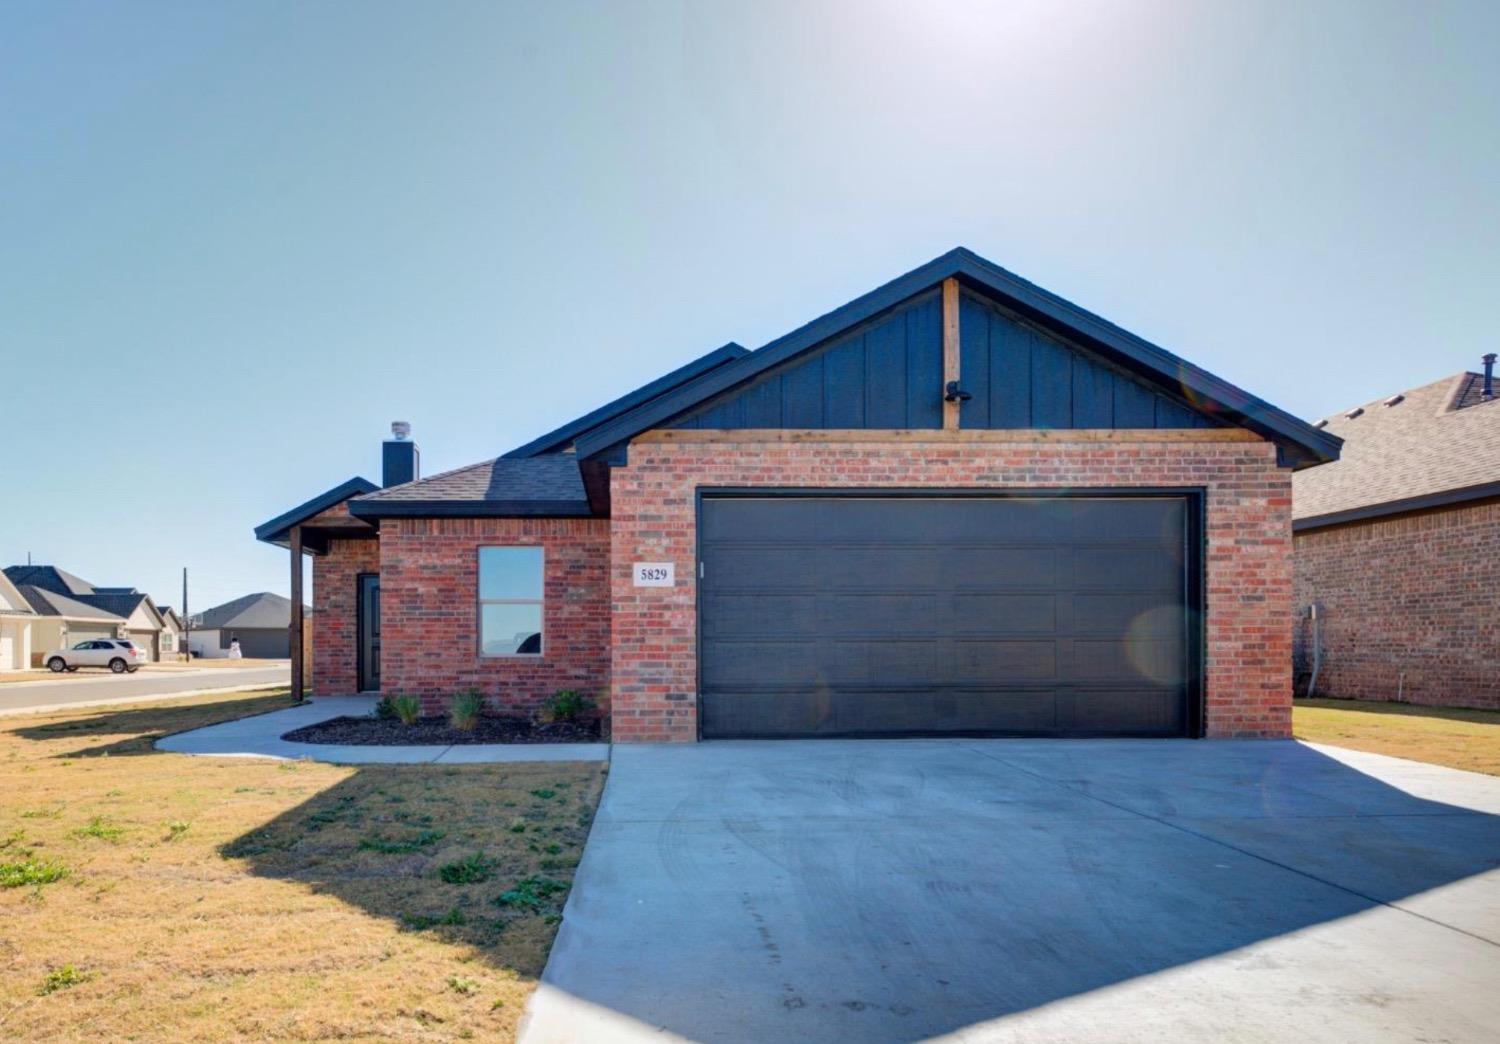 Builder is offering up to $10,000 flex cash!! Just minutes from shopping, dining, Texas Tech, the medical district, and Frenship Schools the location could not be better! Situated on a corner lot this 4 bedroom, 2 bathroom home is exactly what you need! Carpeted bedrooms, vinyl plank floors, quartz countertops, and modern light fixtures are just a few of the benefits this home has to offer! Book your showing today!